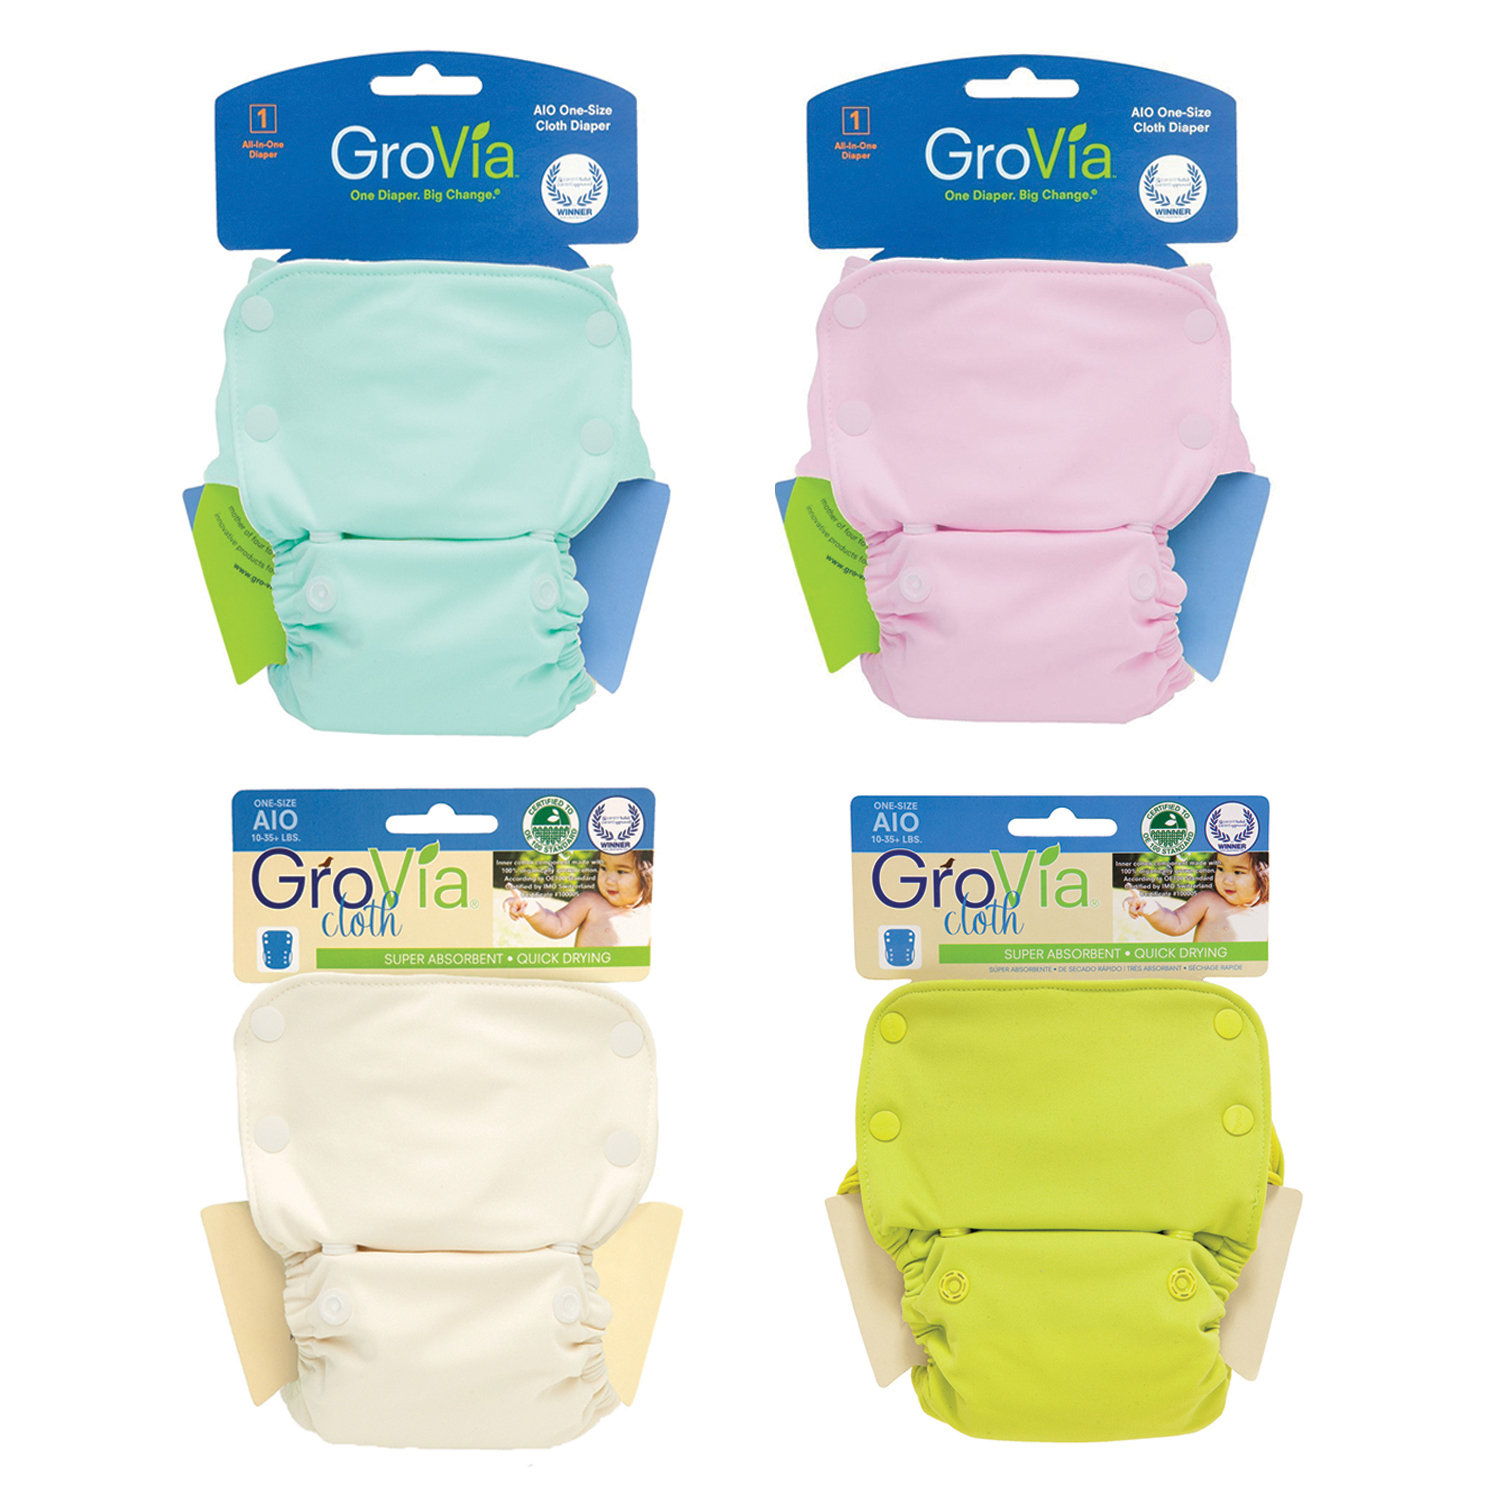 GROVIA AIO (All-in-One) Cloth Lot of 4pcs Cloth Diapers Washable.